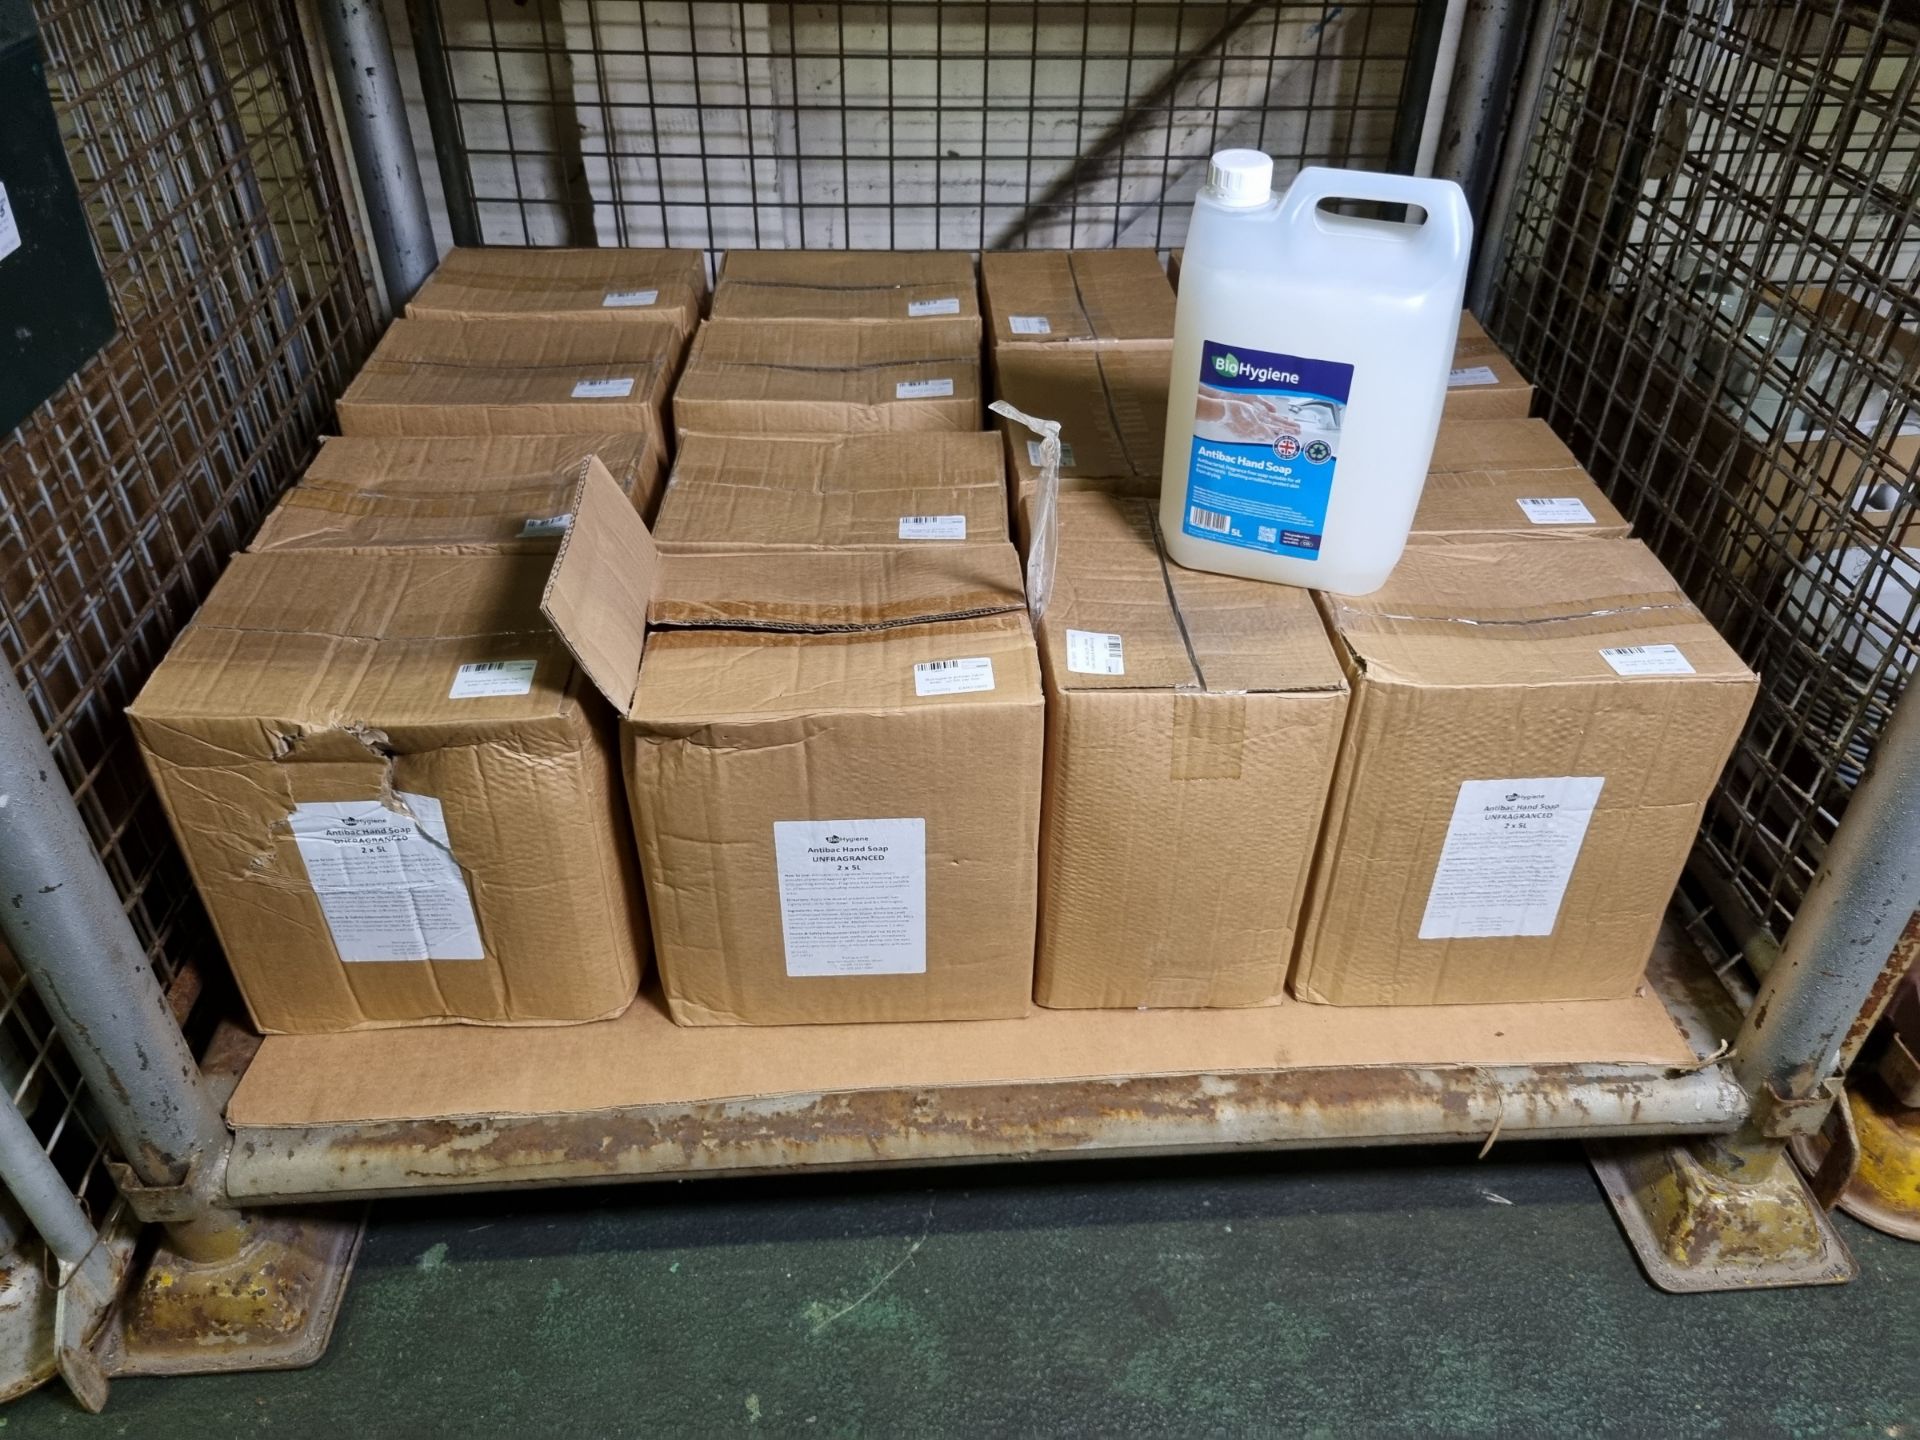 15x boxes of BioHygiene antibacterial hand soap - 5ltr bottles - 2 per box - Image 2 of 4